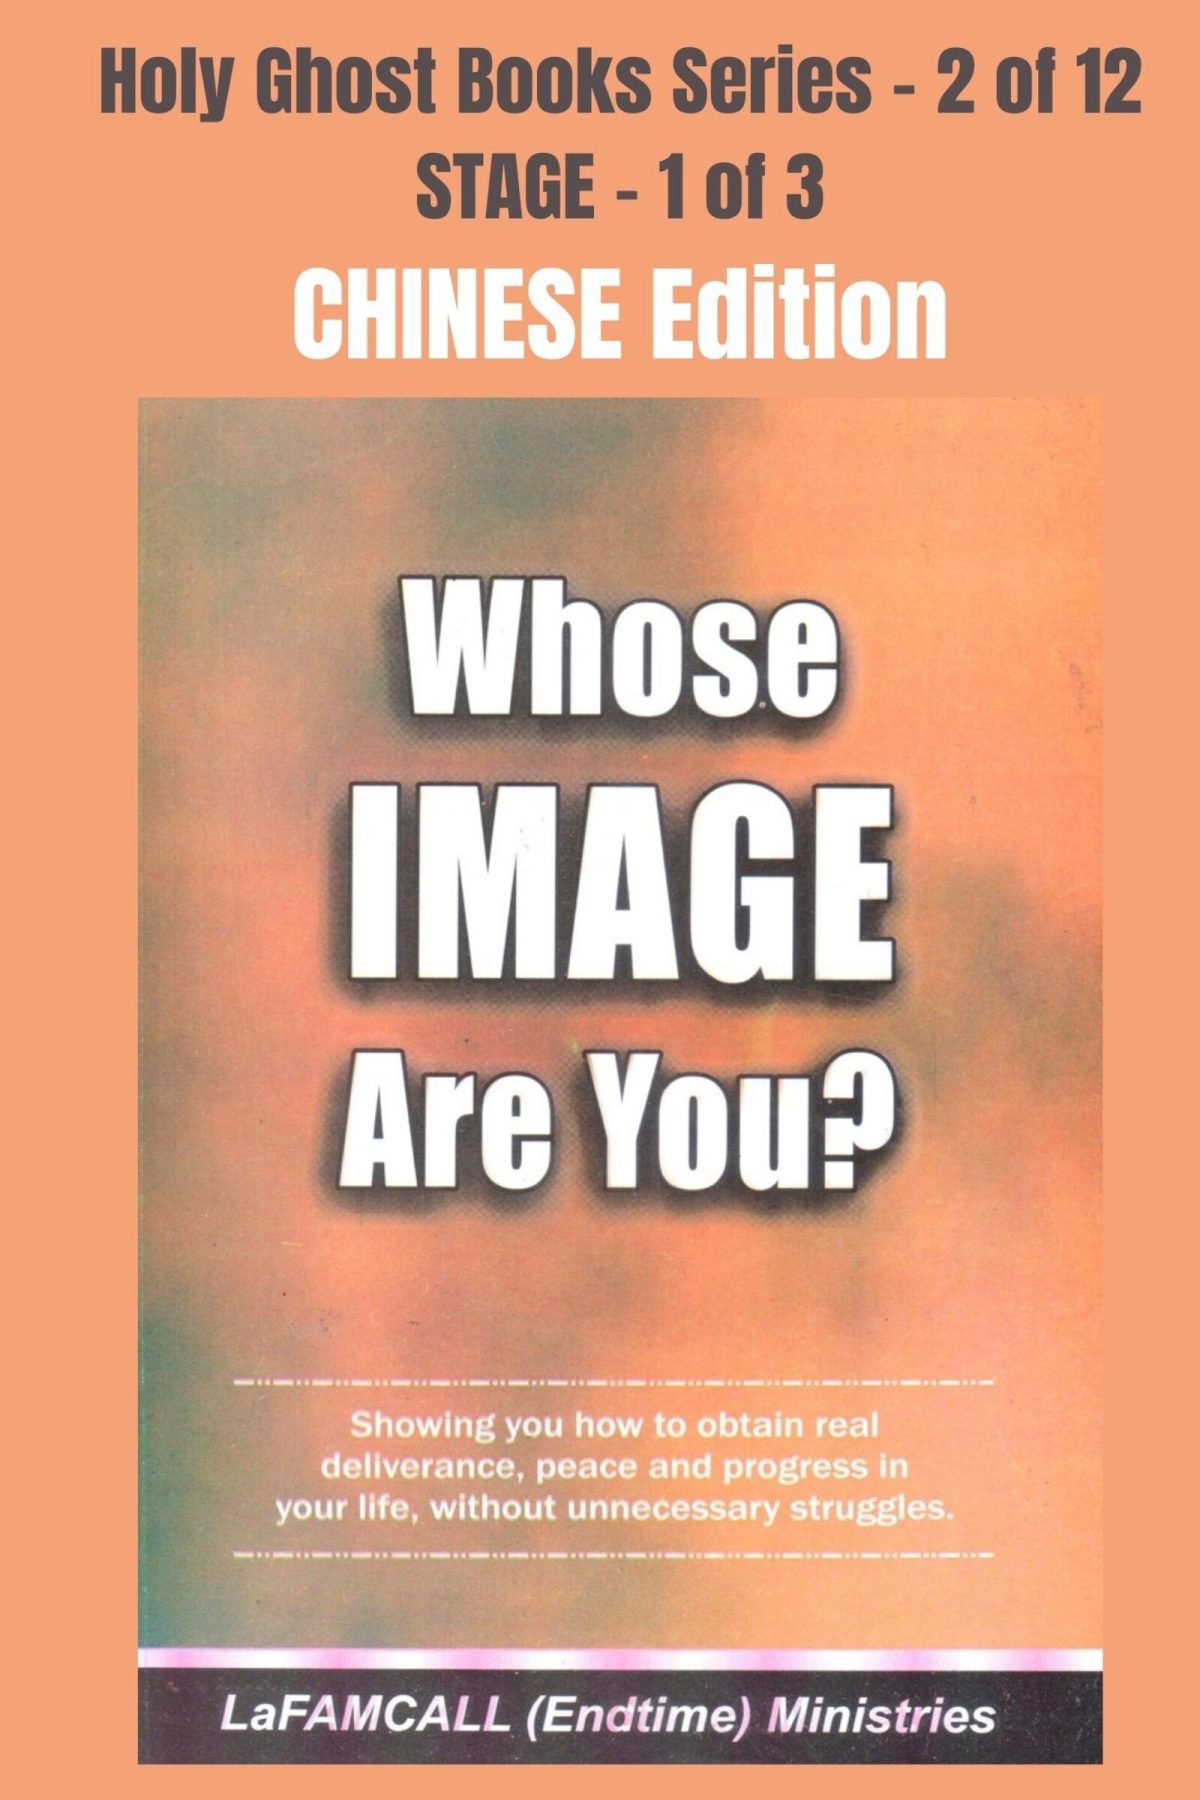 Whose Image are you Chinese - WHOSE IMAGE ARE YOU? Showing you how to obtain real deliverance, peace and progress in your life, without unnecessary struggles - CHINESE EDITION - Ebook School of the Holy Spirit Series 2 of 12, Stage 1 of 3